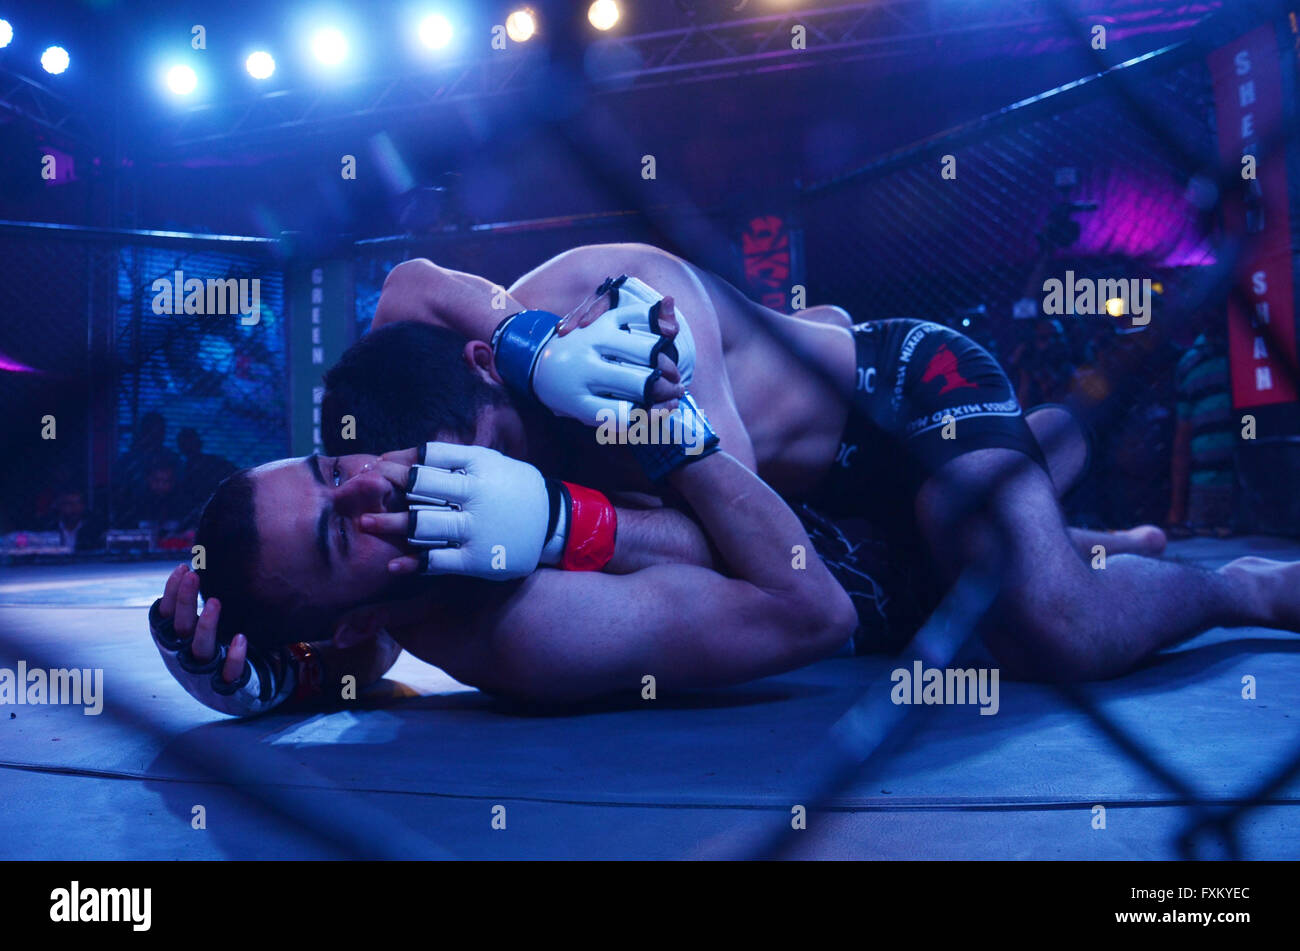 Lahore, Pakistan. 16th Apr, 2016. A view of the Pakistan kick boxing championship for the first time in Pakistan. Mehmosh Raza of Iran attack on Haroon Sohail of Pakistan during Pakistan kick boxing championship in Lahore. Pak MMA fighting alliance club held this championship for promoting kick fighting in Pakistan and for the first time invite players throughout subcontinent in Pakistan. © Rana Sajid Hussain/Pacific Press/Alamy Live News Stock Photo